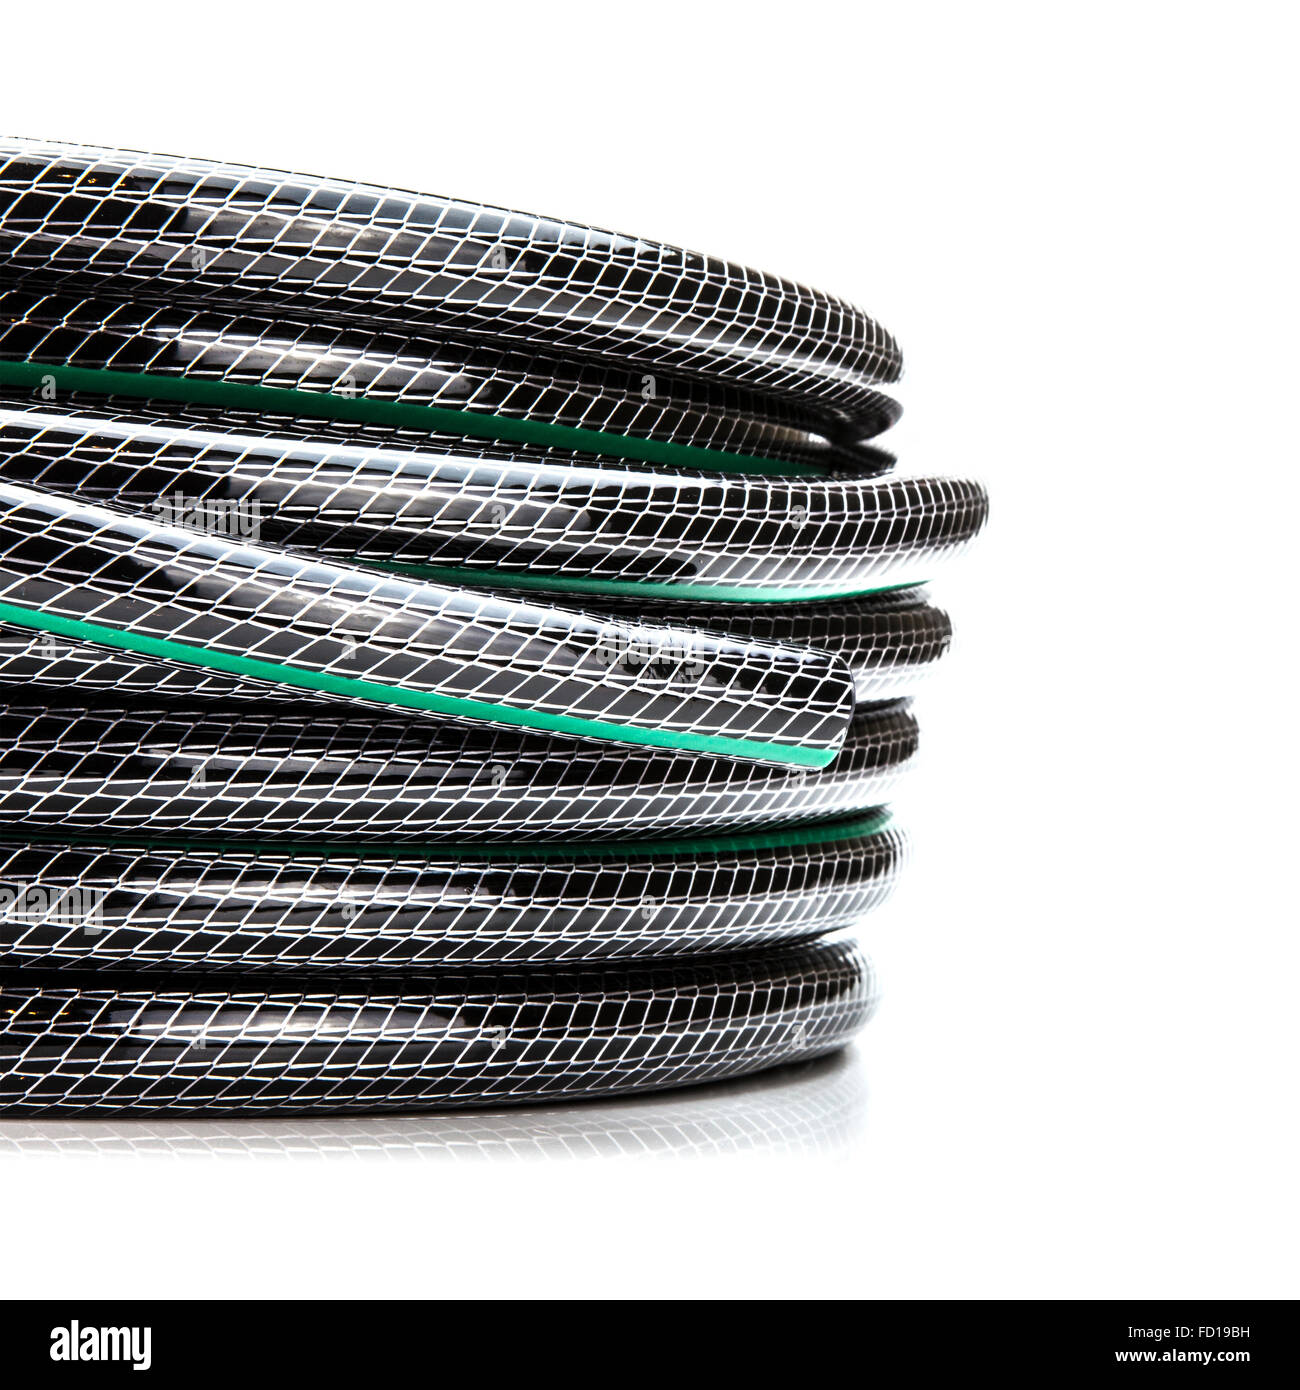 Rolled garden hose isolated on white Stock Photo